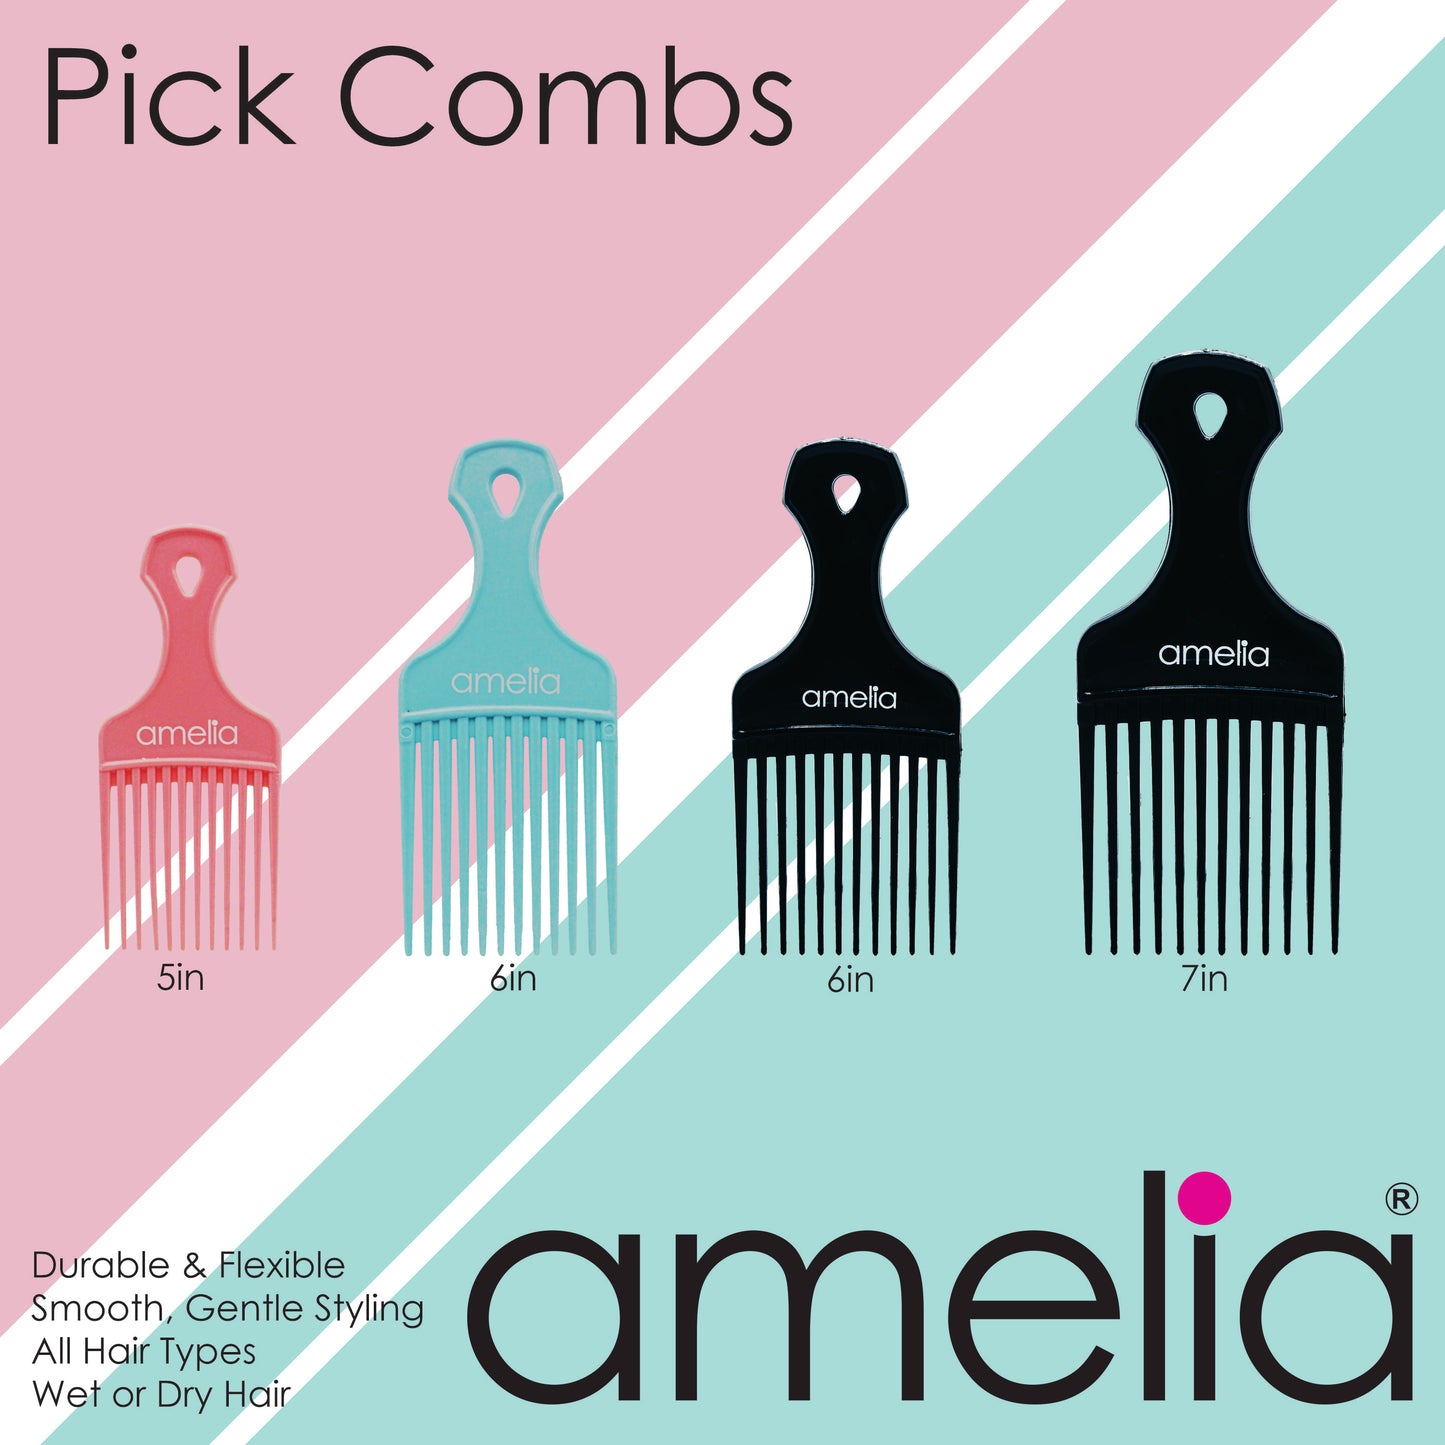 Amelia Beauty, 6in Black Curly Hair Wide Tooth Pick, Made in USA, Professional Grade Hair Pick Create Volume, Detangle, Portable Salon Barber Shop Afro Pick Comb Hair Styling Tool, 6"x2.5", 2 Pack